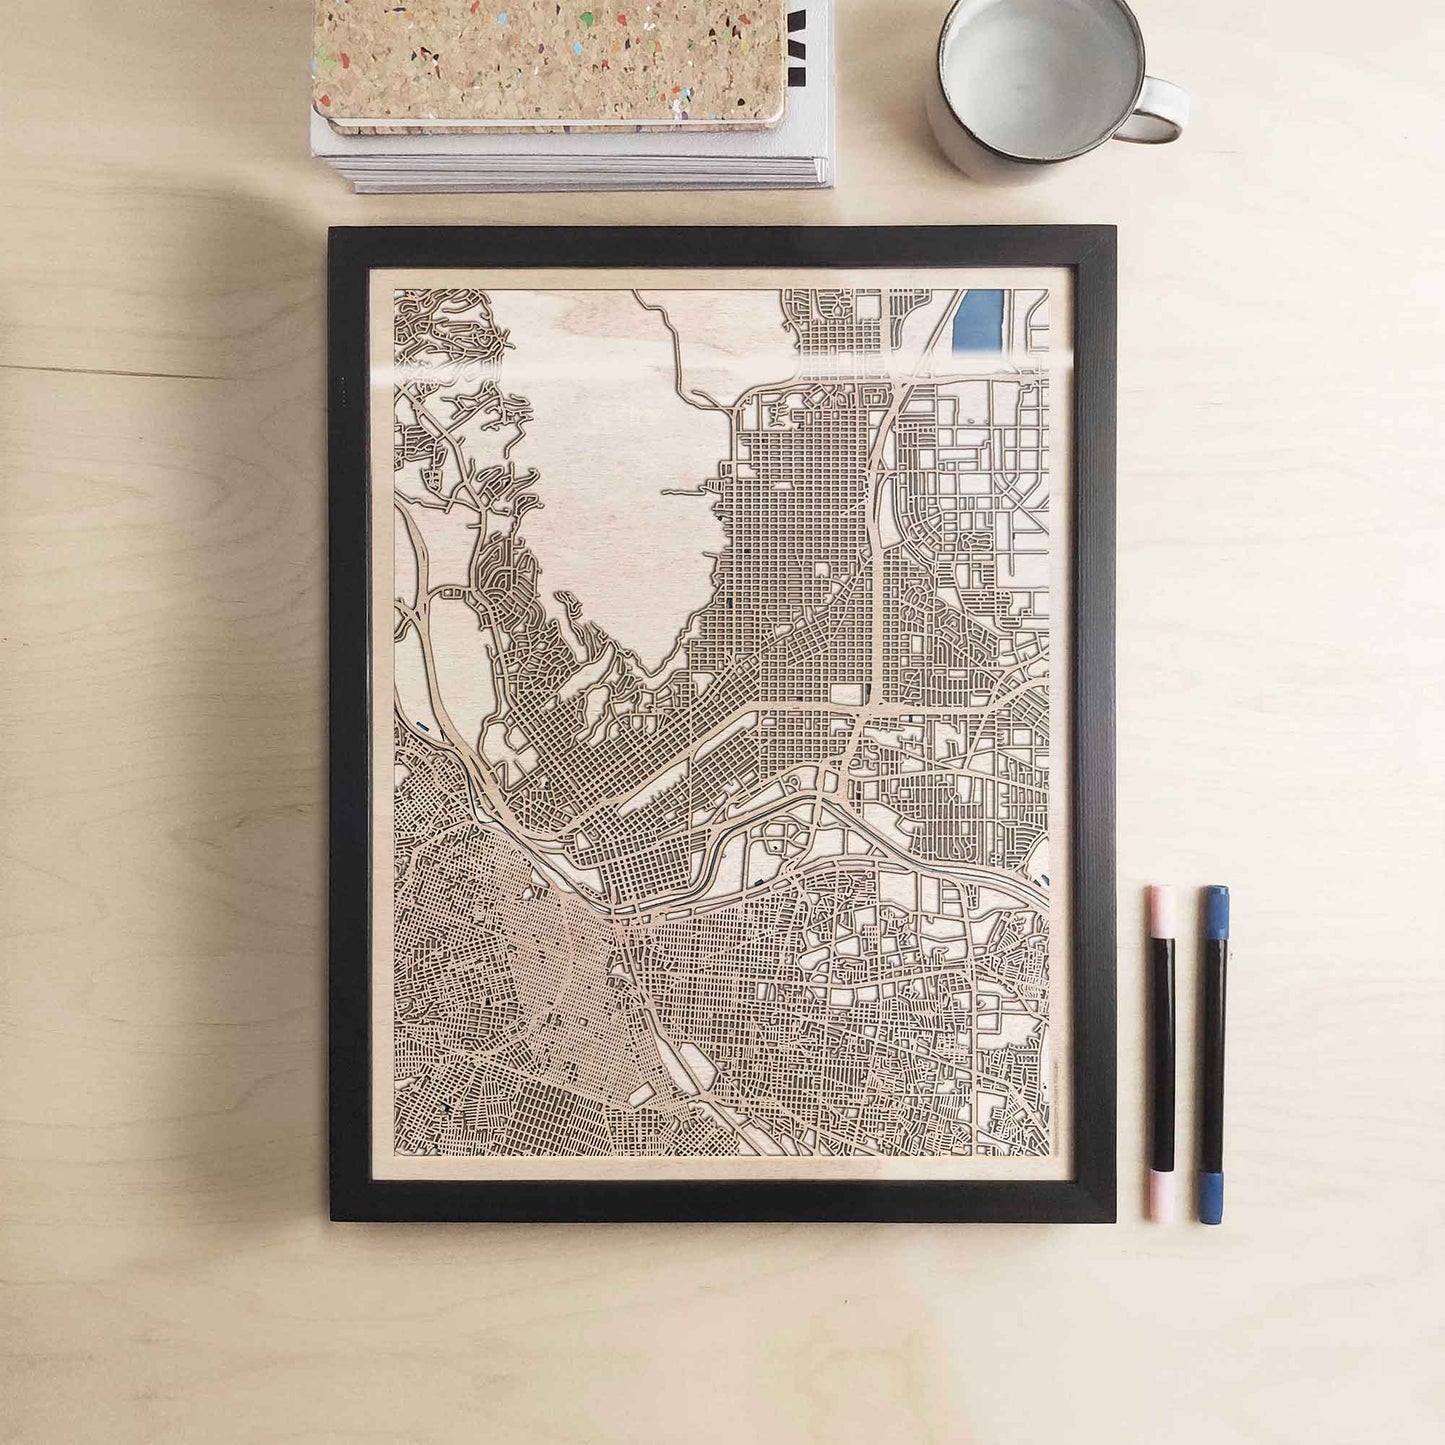 El Paso Wooden Map by CityWood - Custom Wood Map Art - Unique Laser Cut Engraved - Anniversary Gift